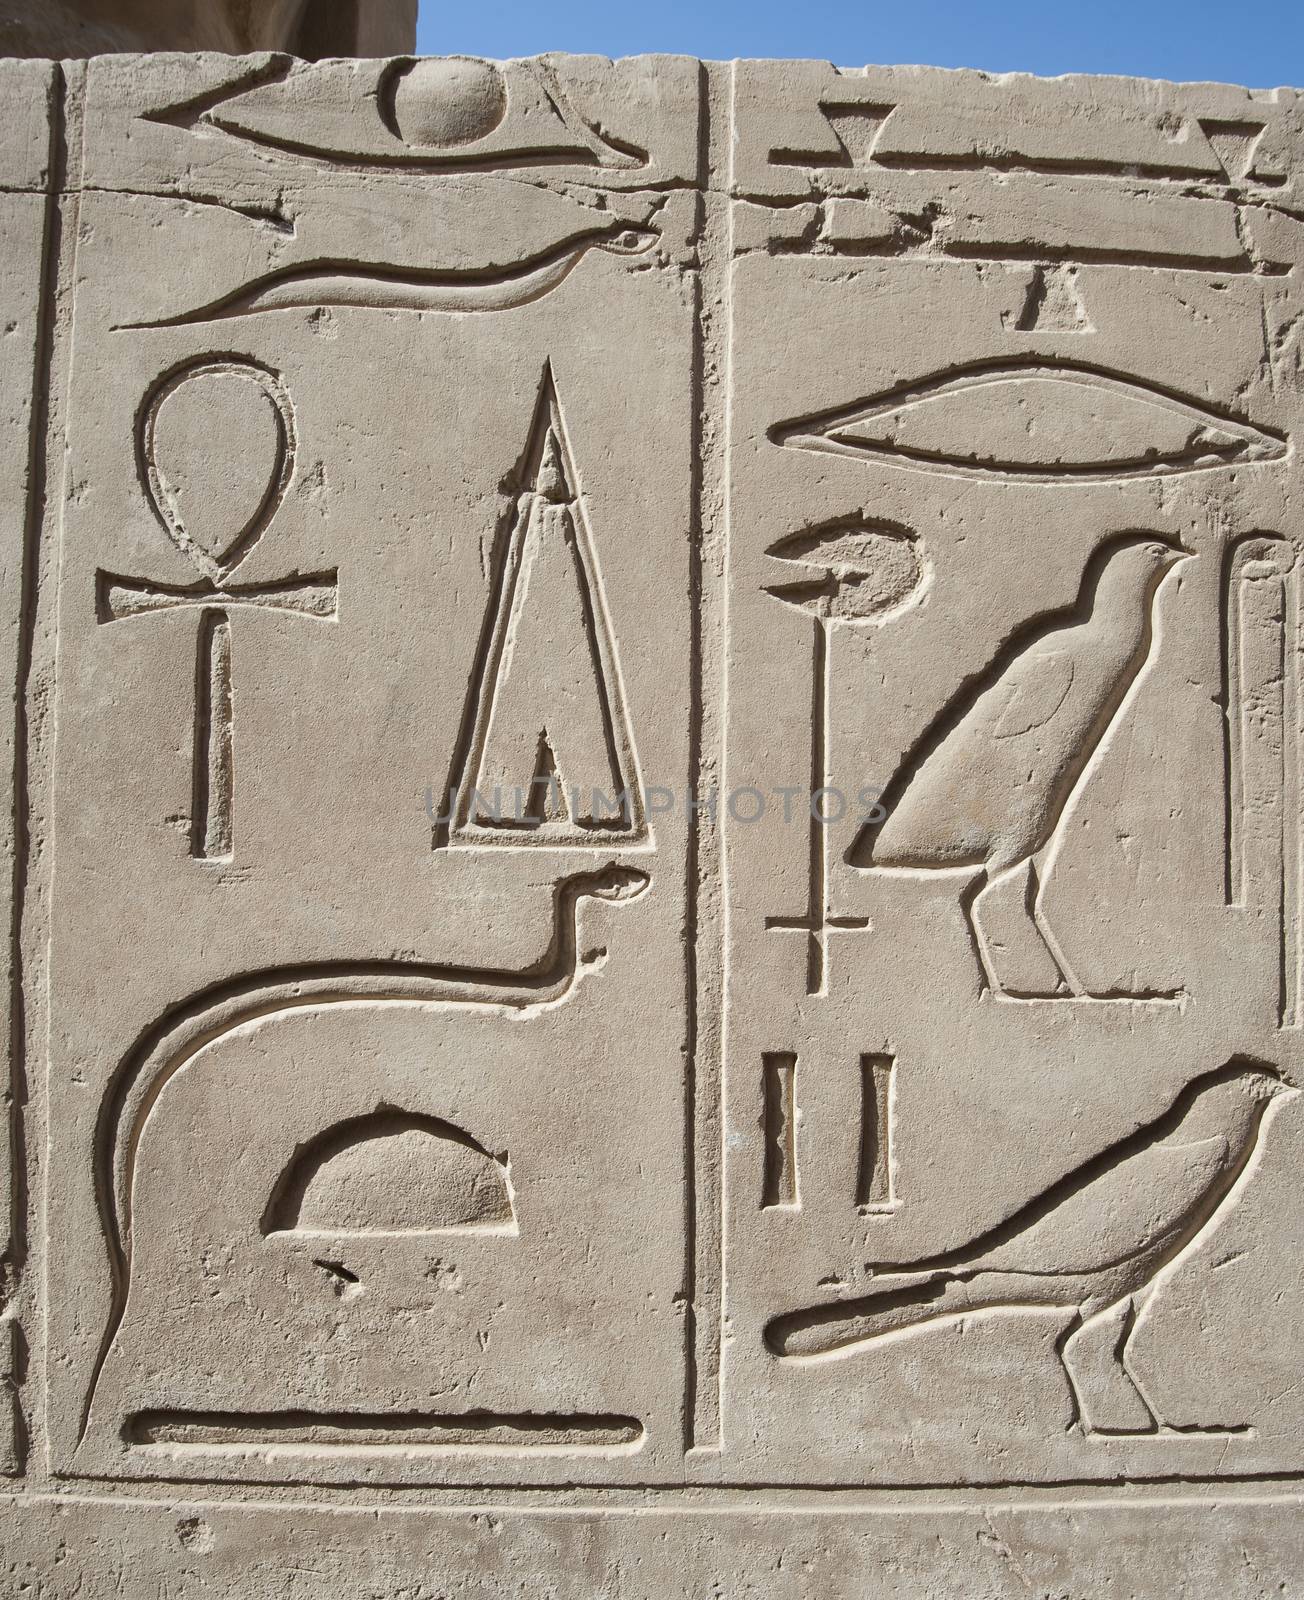 Egyptian hieroglyphic carvings on wall by paulvinten